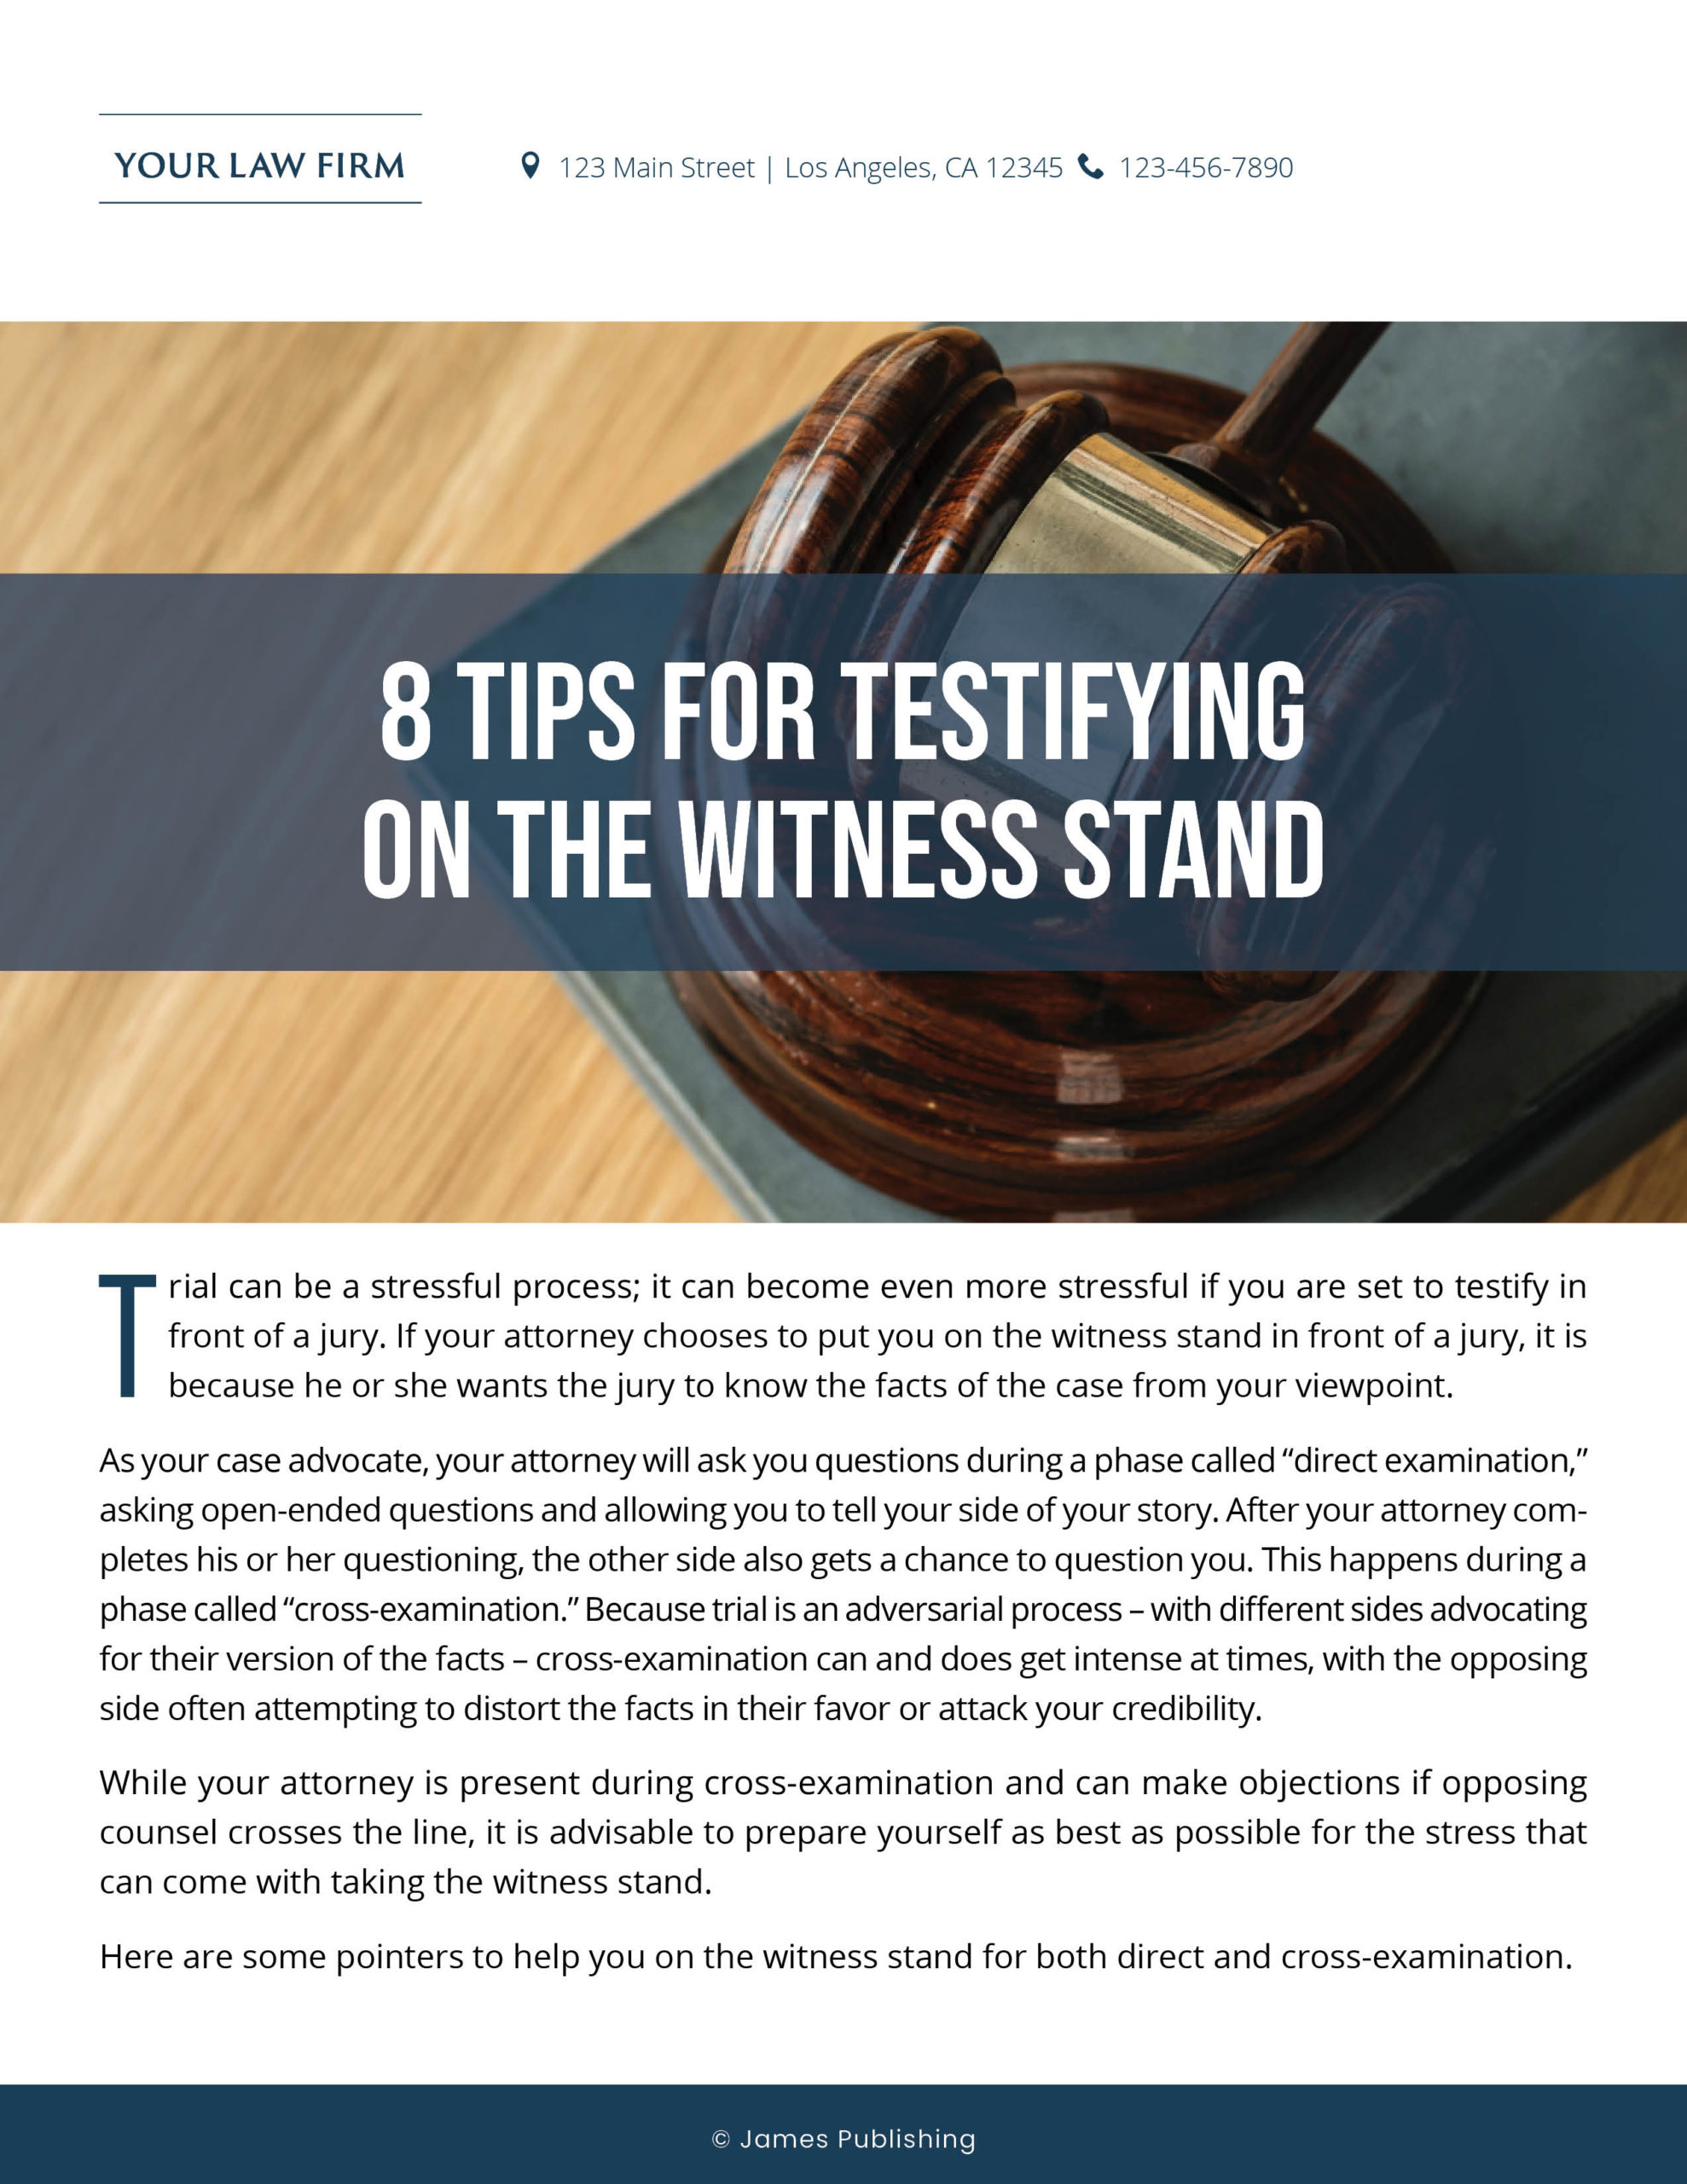 PI-08 8 Tips for Testifying on the Witness Stand